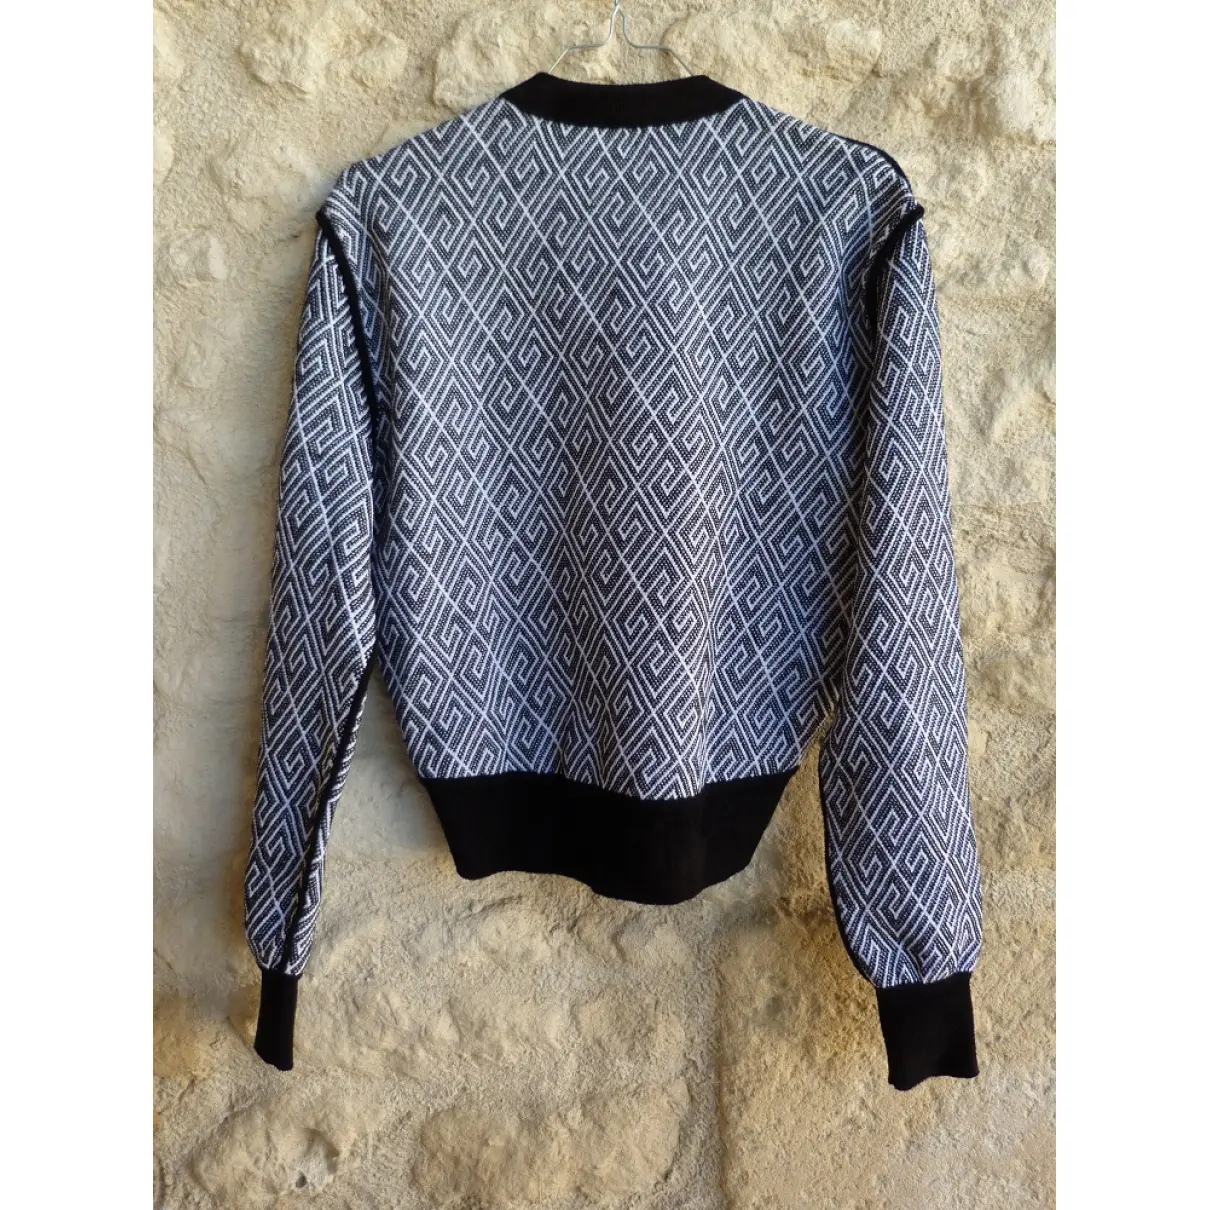 Buy Givenchy Knitwear online